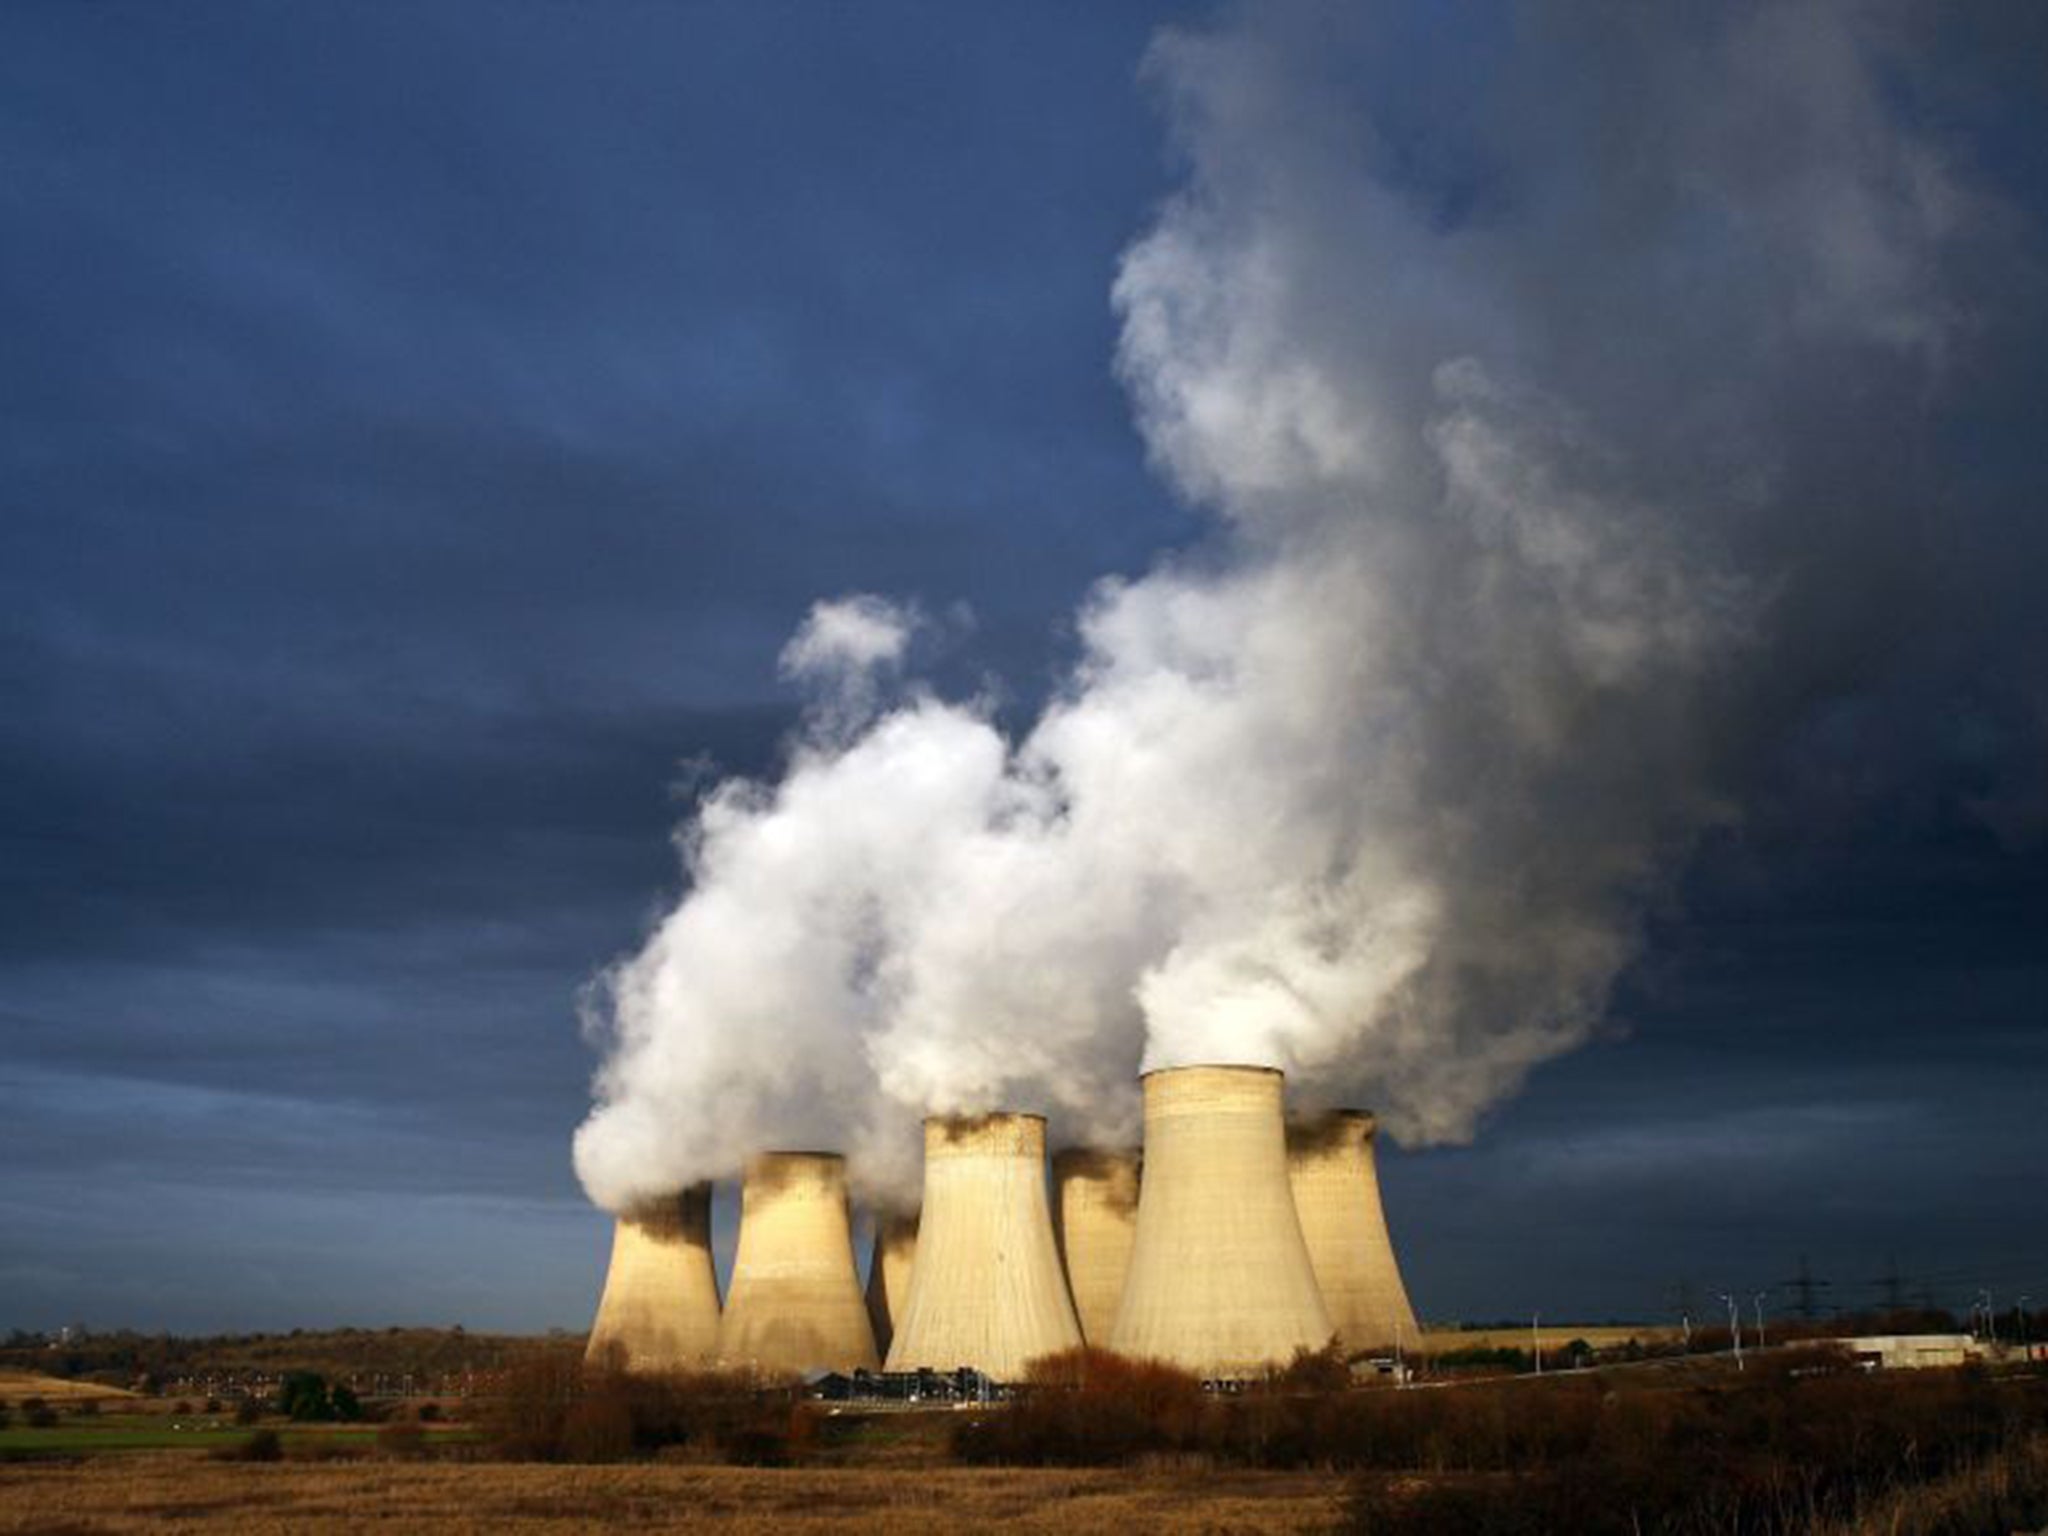 Manufacturing, power generation and home heating saw the biggest savings, according to the European Environment Agency